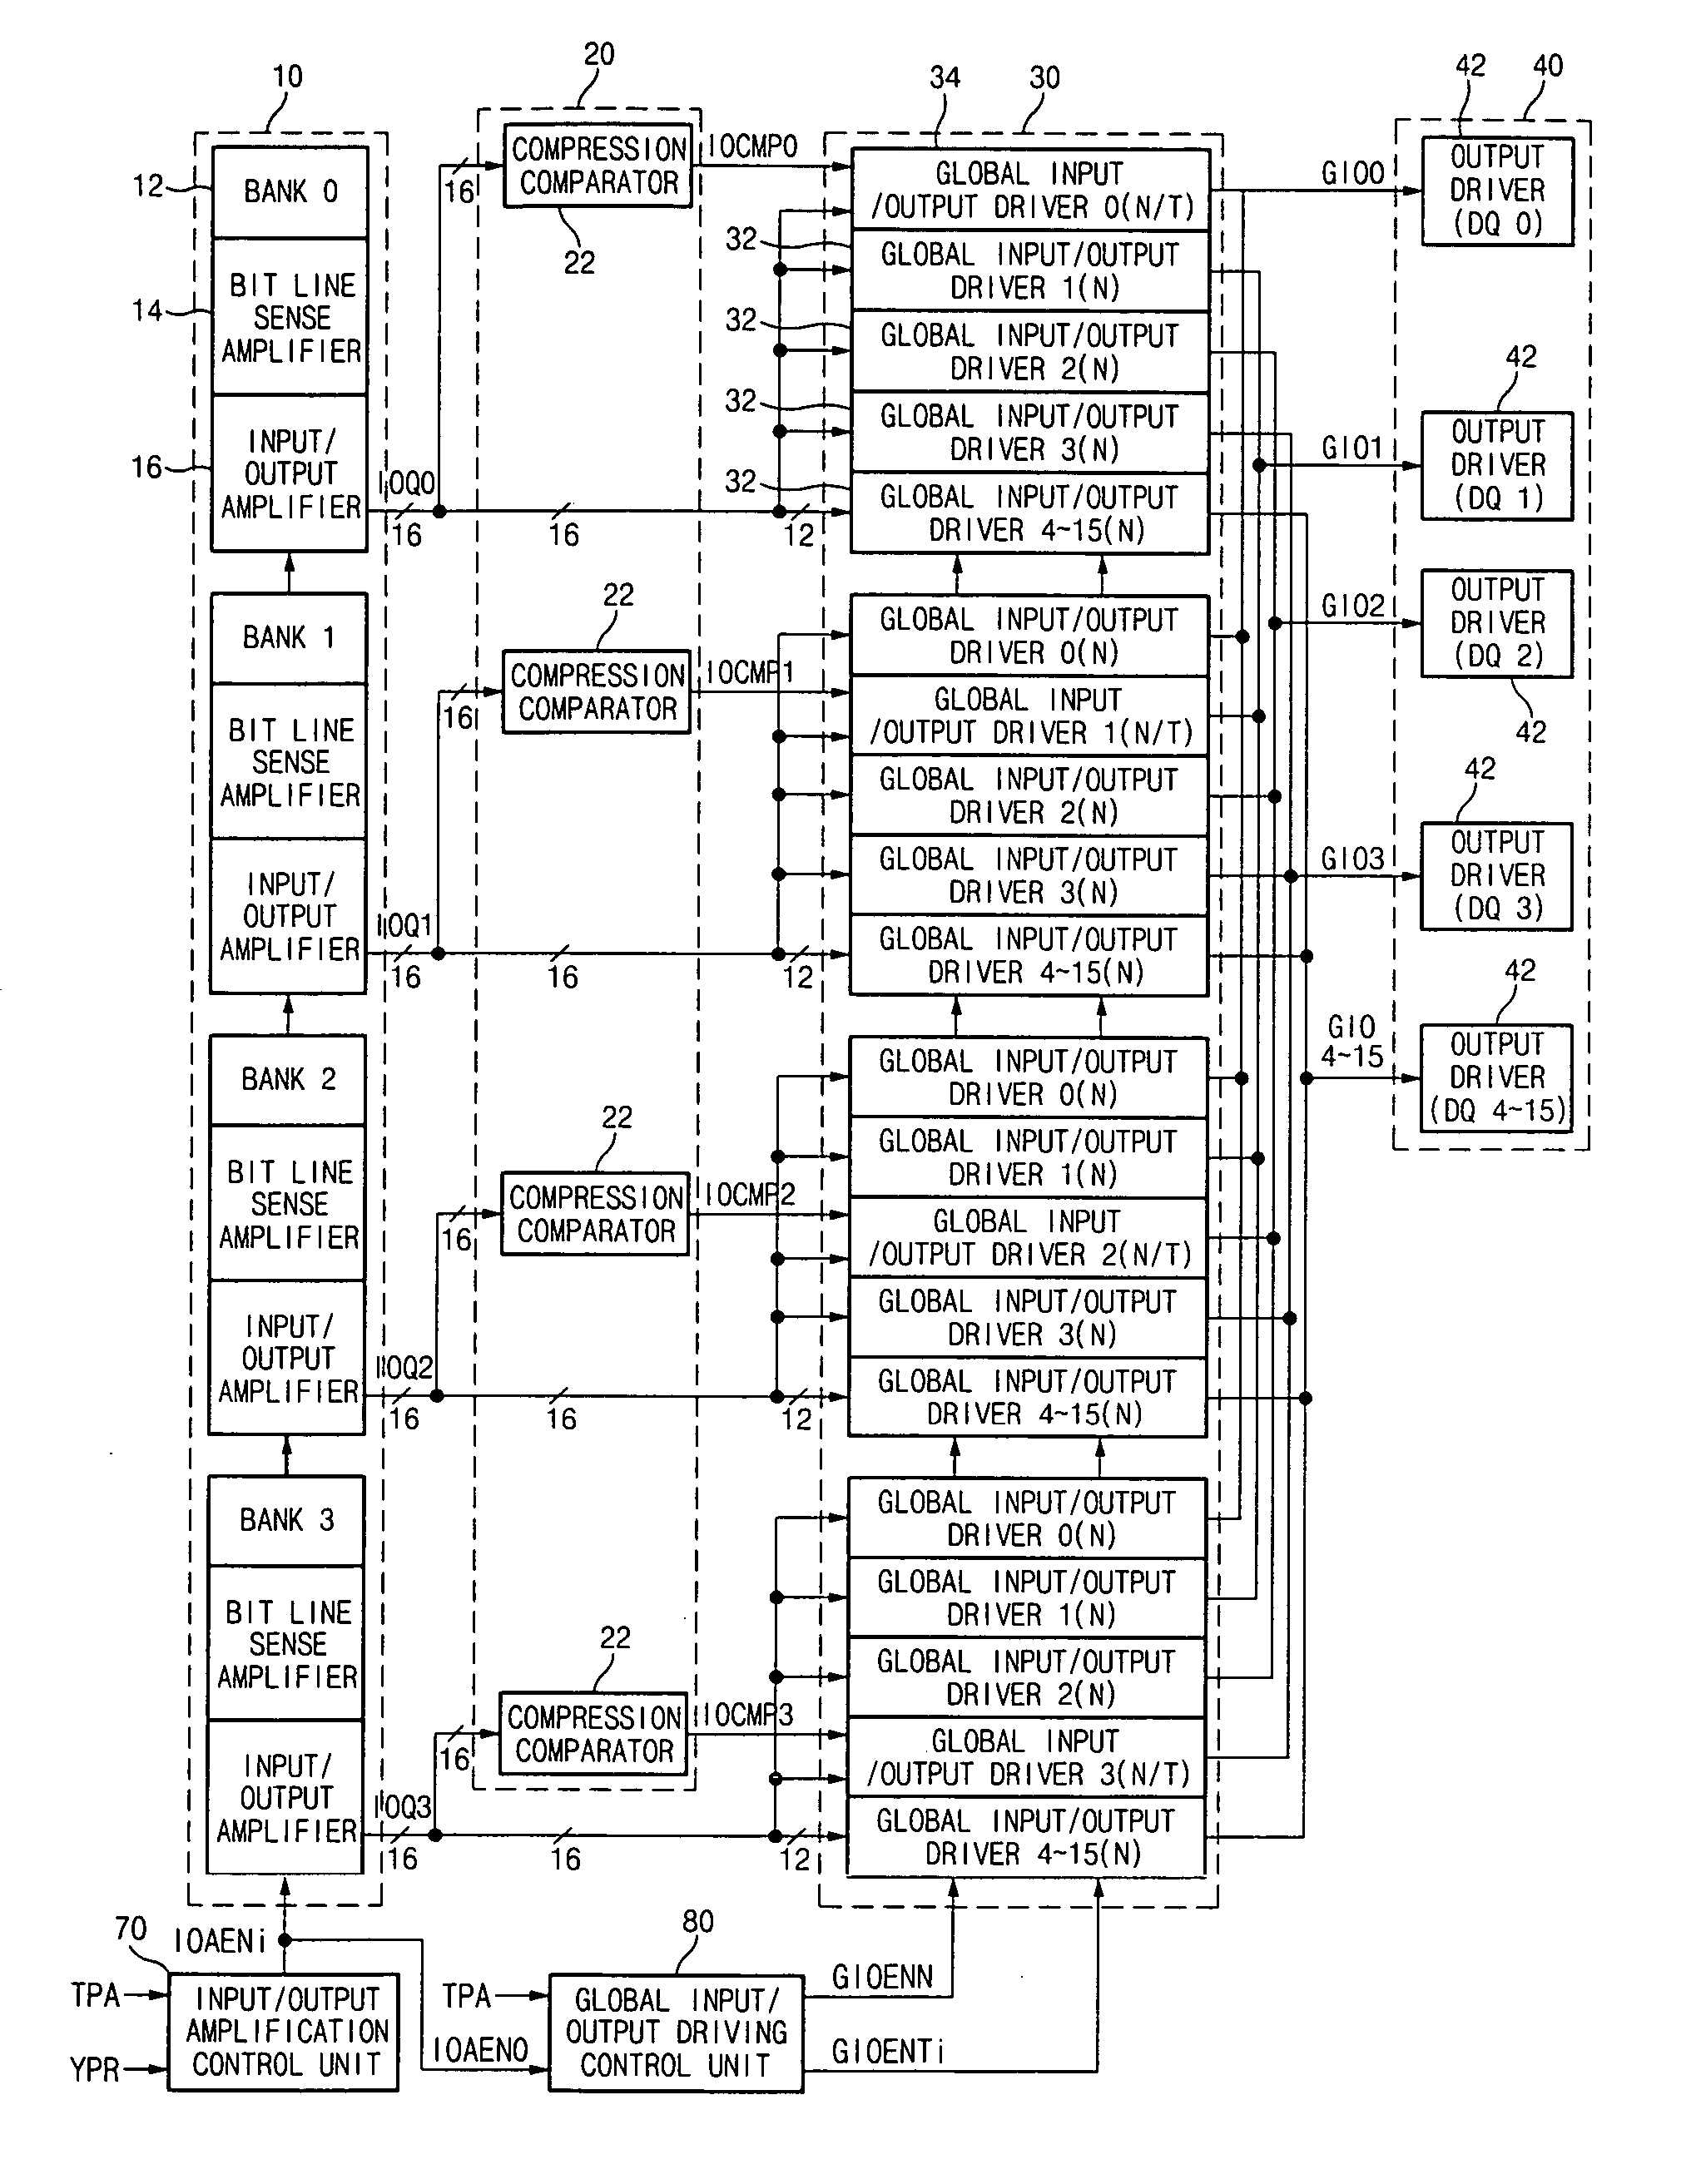 Parallel compression test circuit of memory device